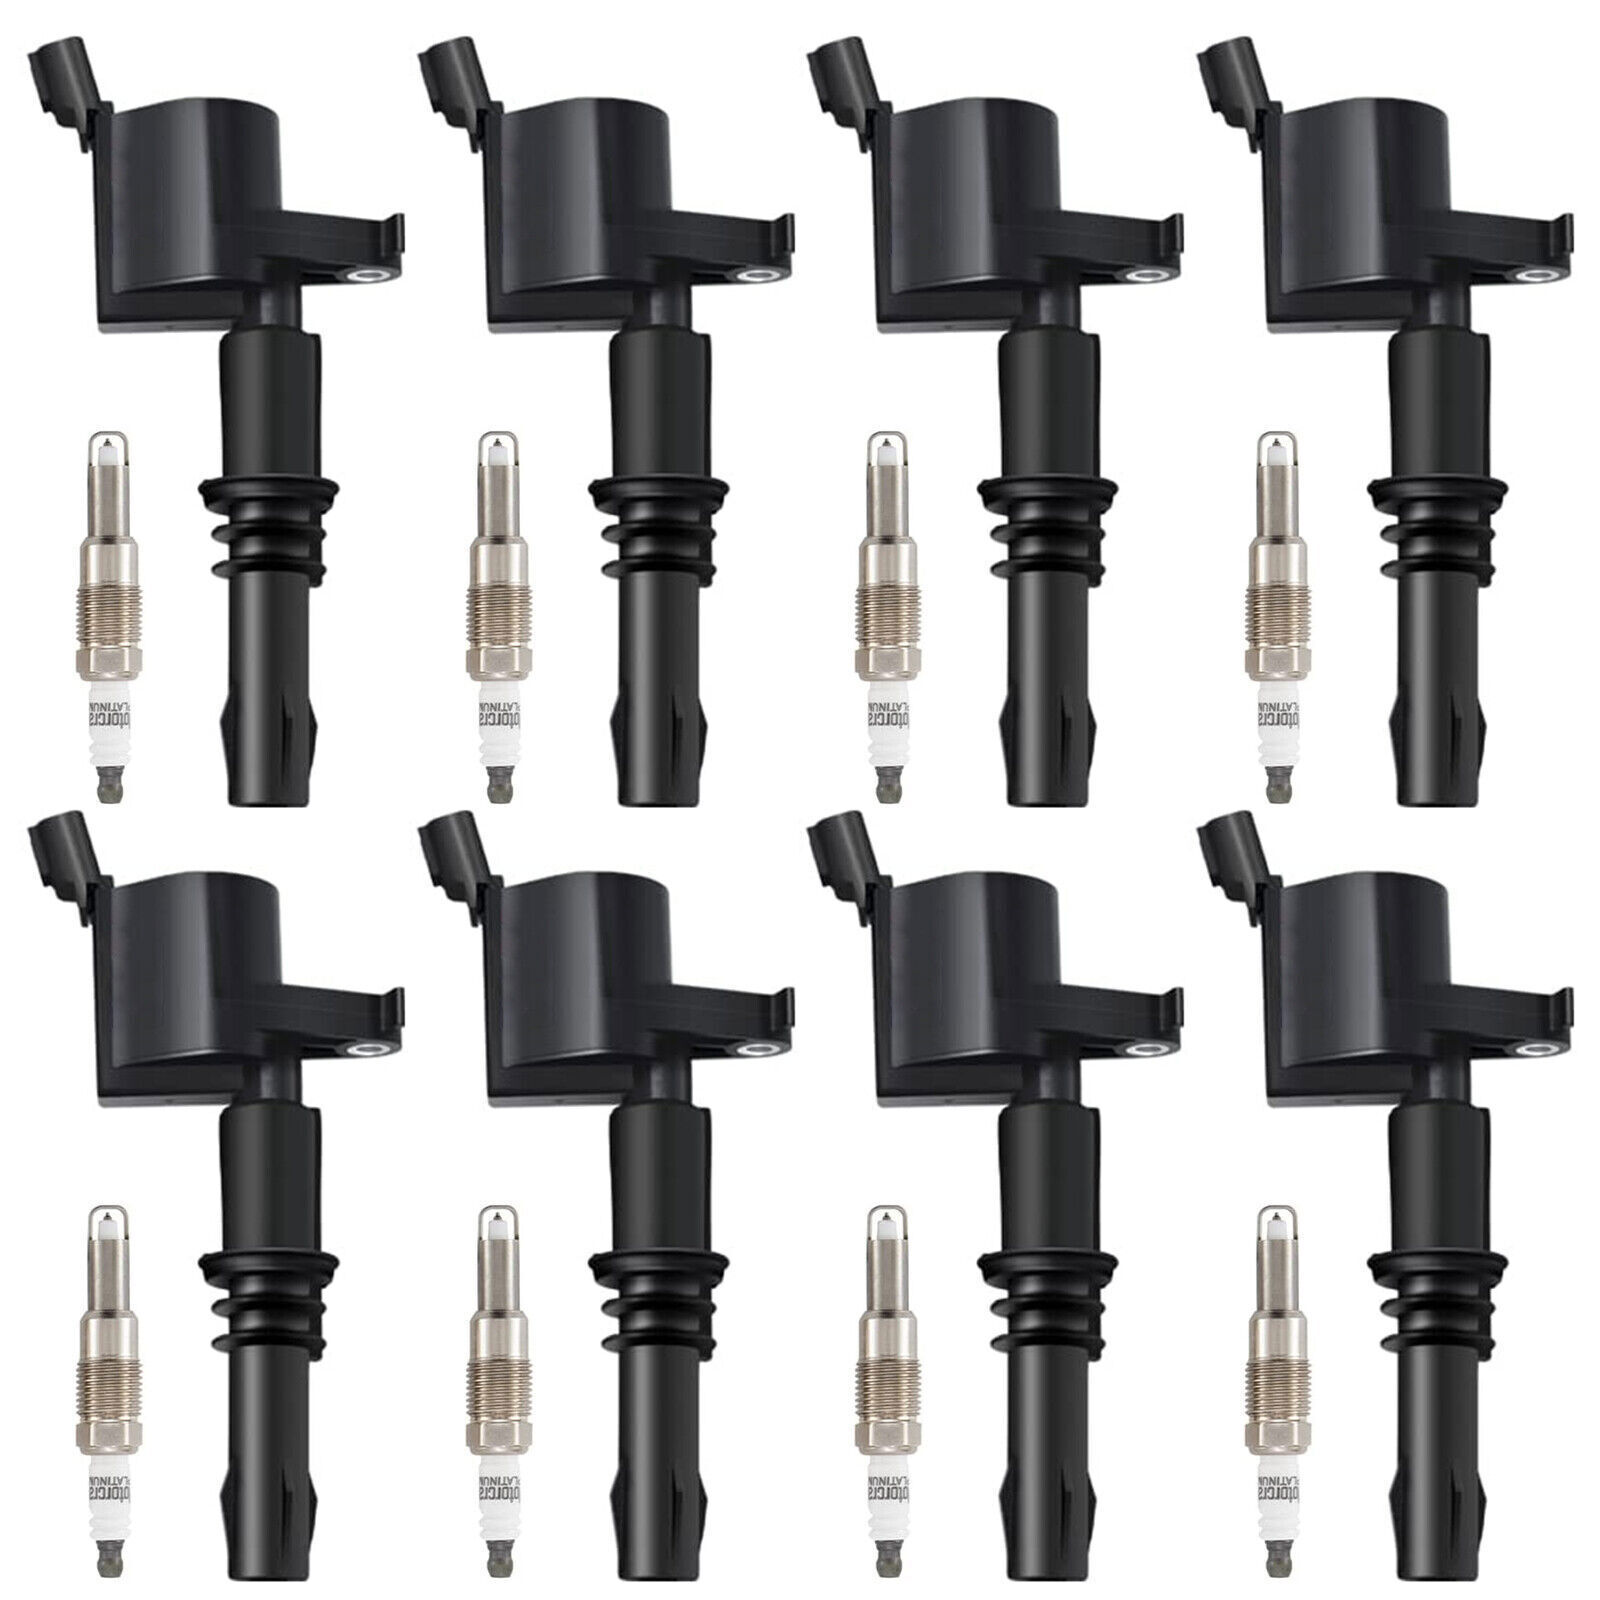 8Pack DG511 Ignition Coils and Spark Plugs For 2004-2010 Ford F150 5.4L